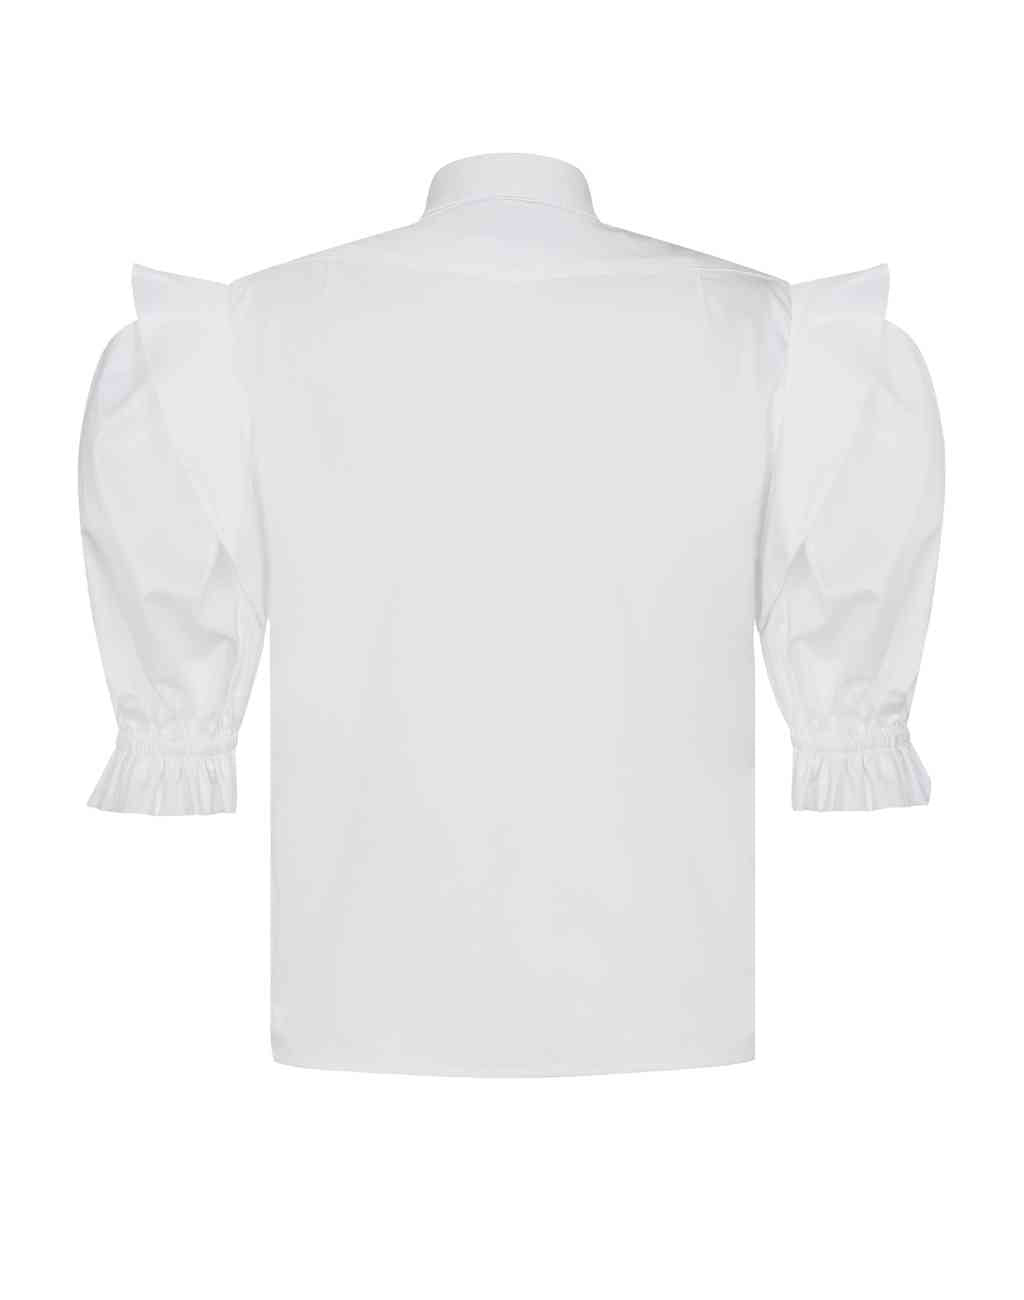 Chia Blouse with Pleated Front Placket and Puffed Sleeve with Ruffle - Visit Nifty De Loreta 